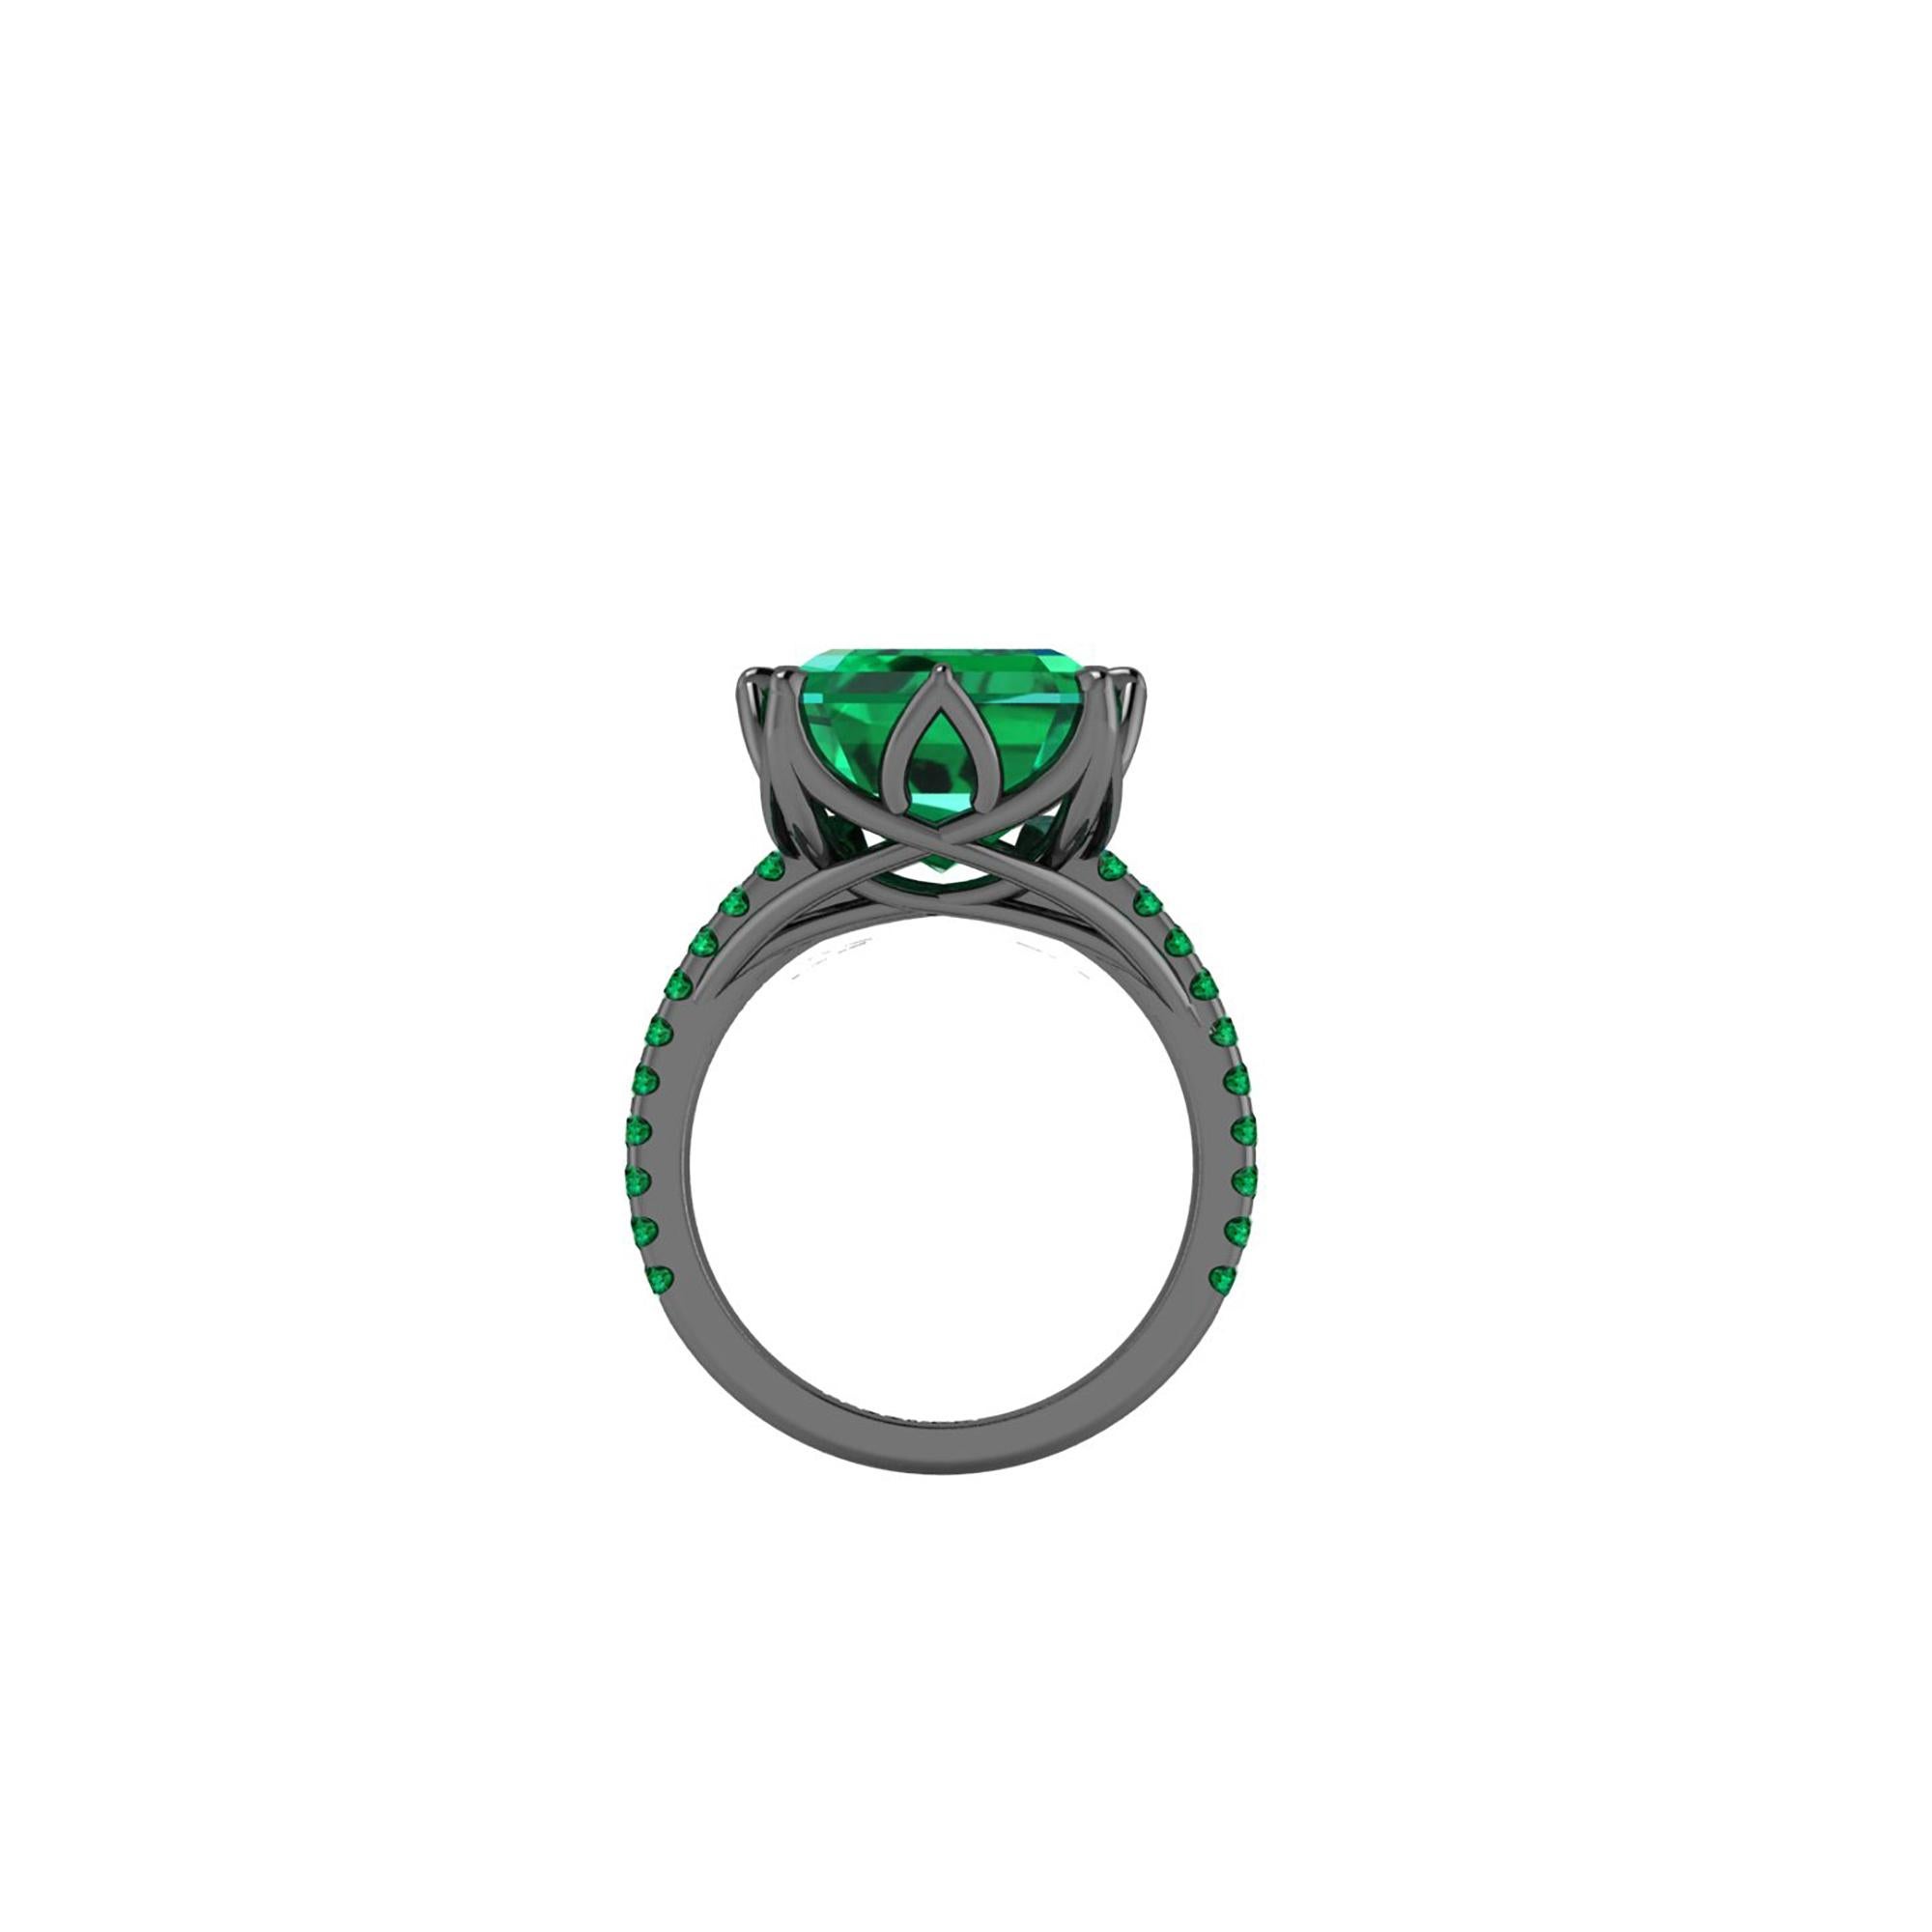 GRS Certified 6.31 carat Colombian emerald cut Emerald, very high quality color,  embellished by a pave' of bright green emeralds of approximately  a total carat weight of 0.32 carat, set in a hand crafted 18k Black gold Maleficent ring, created